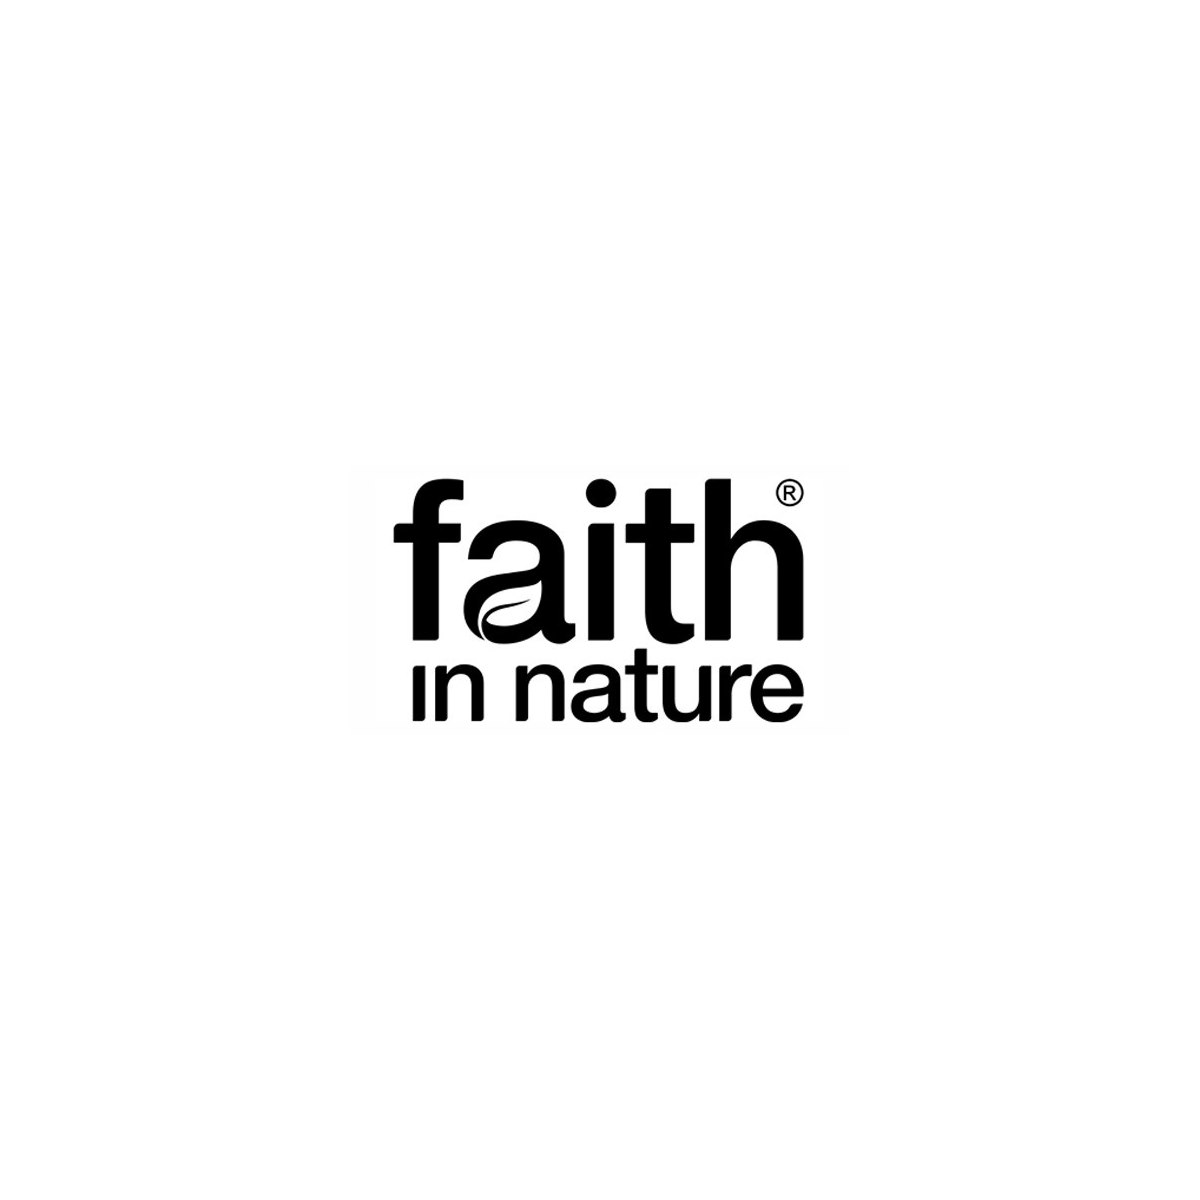 Where to Buy Faith in Nature Products